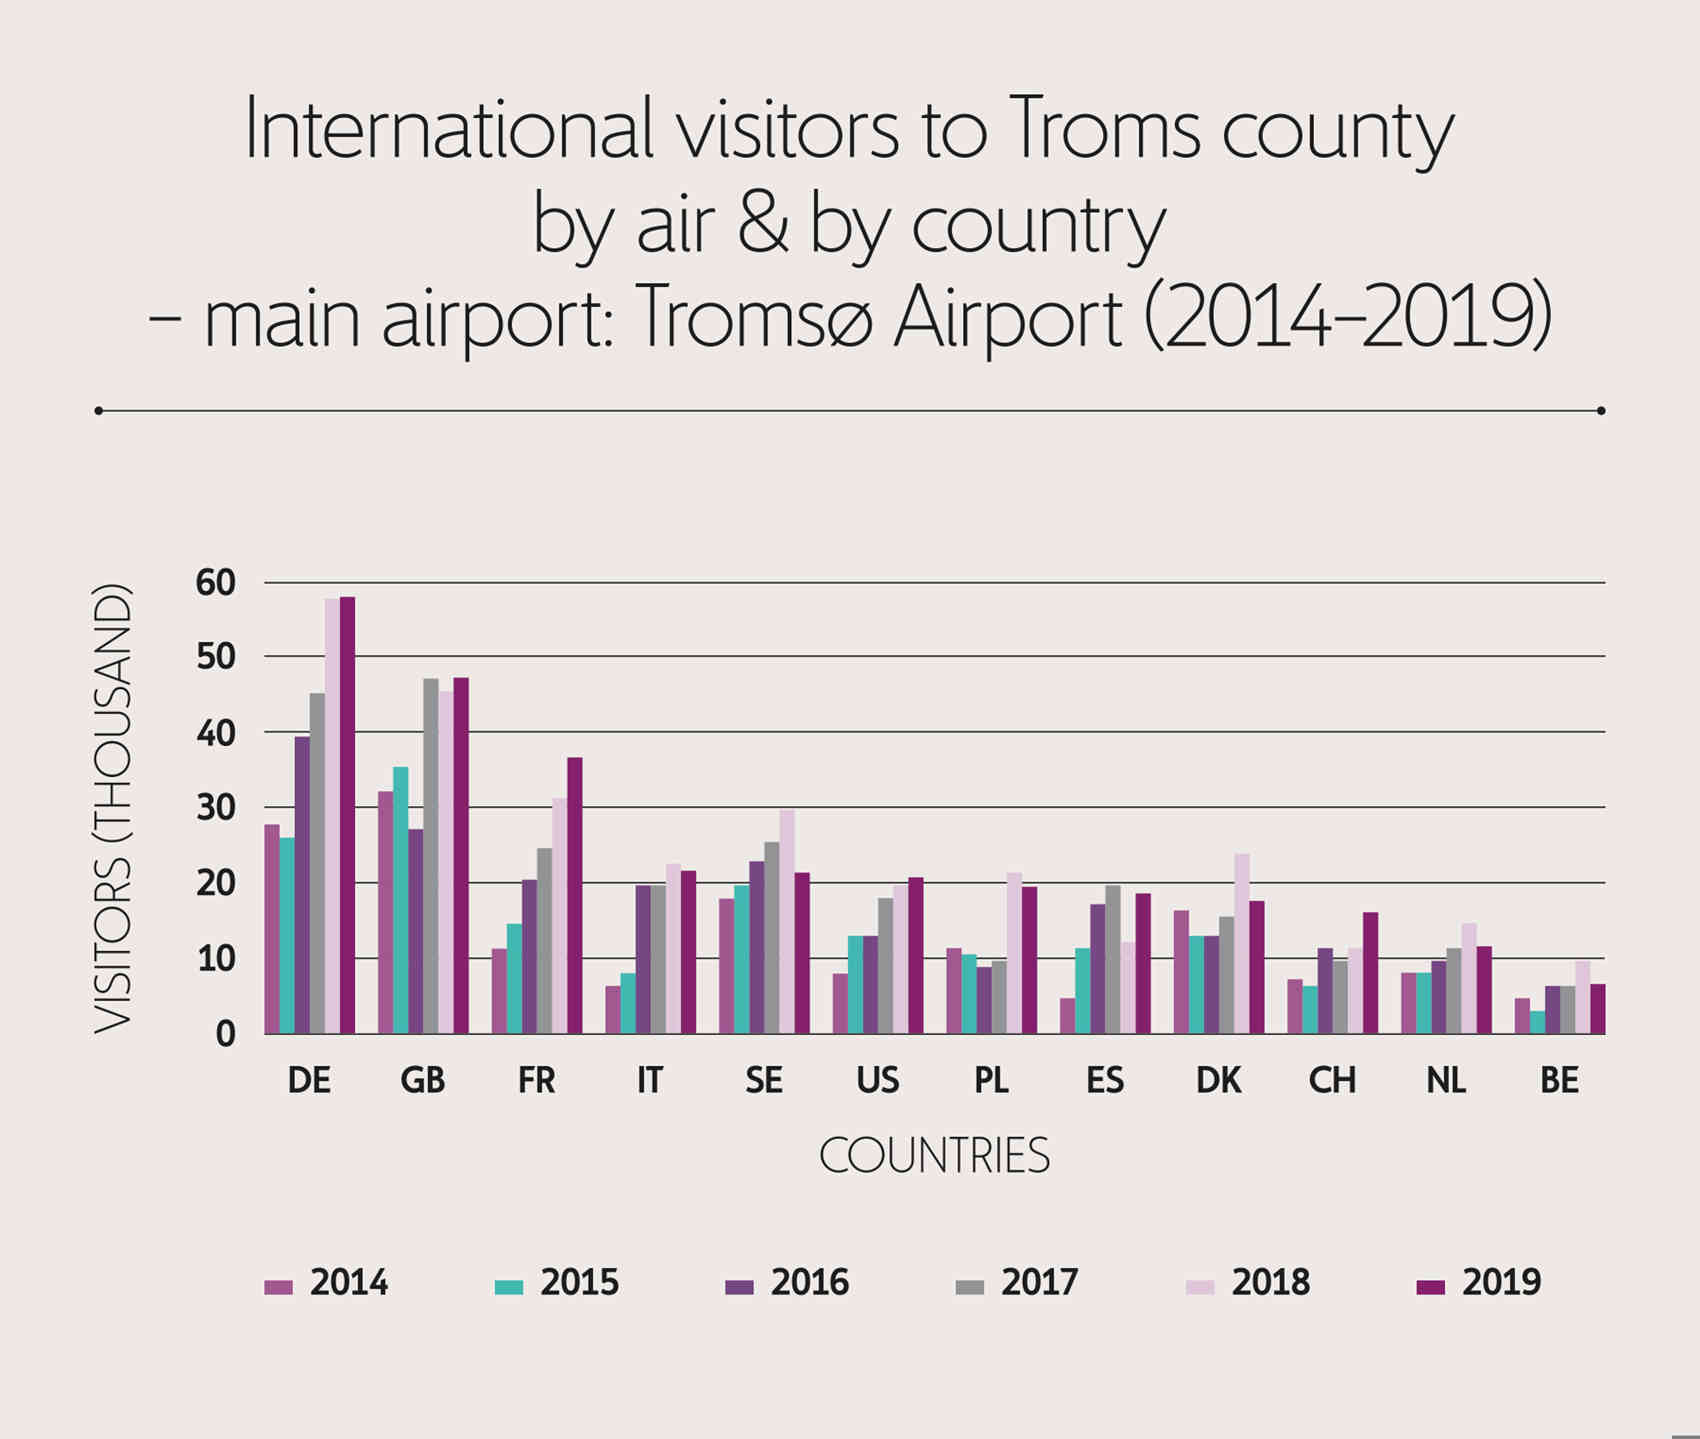 German visitors make up the majority of all visitors to Trom county by air, followed by visitors from the United Kingdom and France.